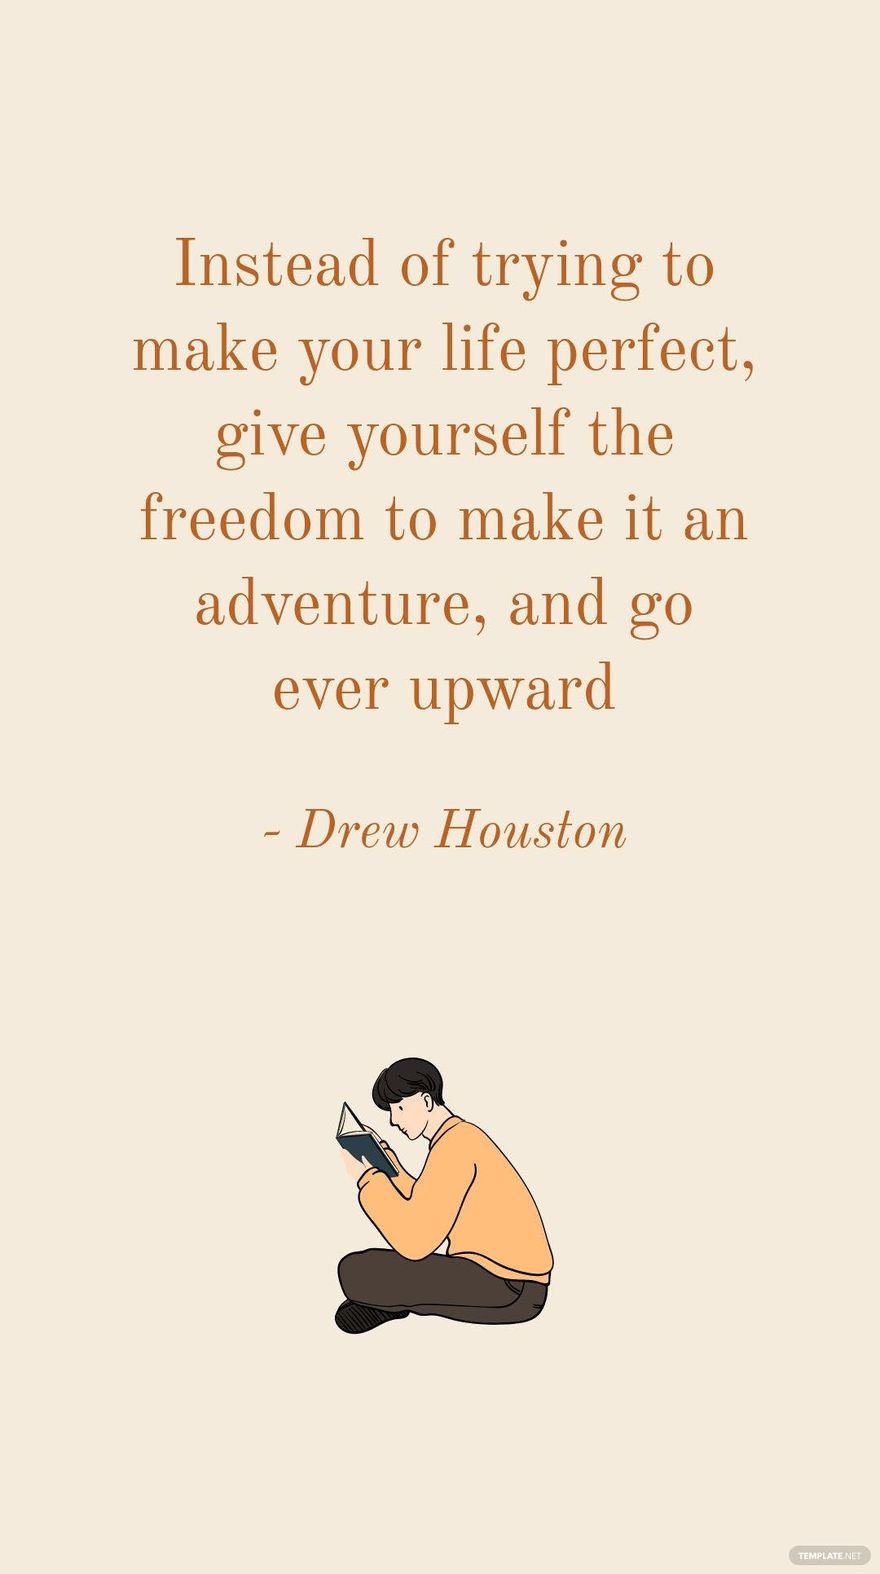 Drew Houston - Instead of trying to make your life perfect, give yourself the freedom to make it an adventure, and go ever upward